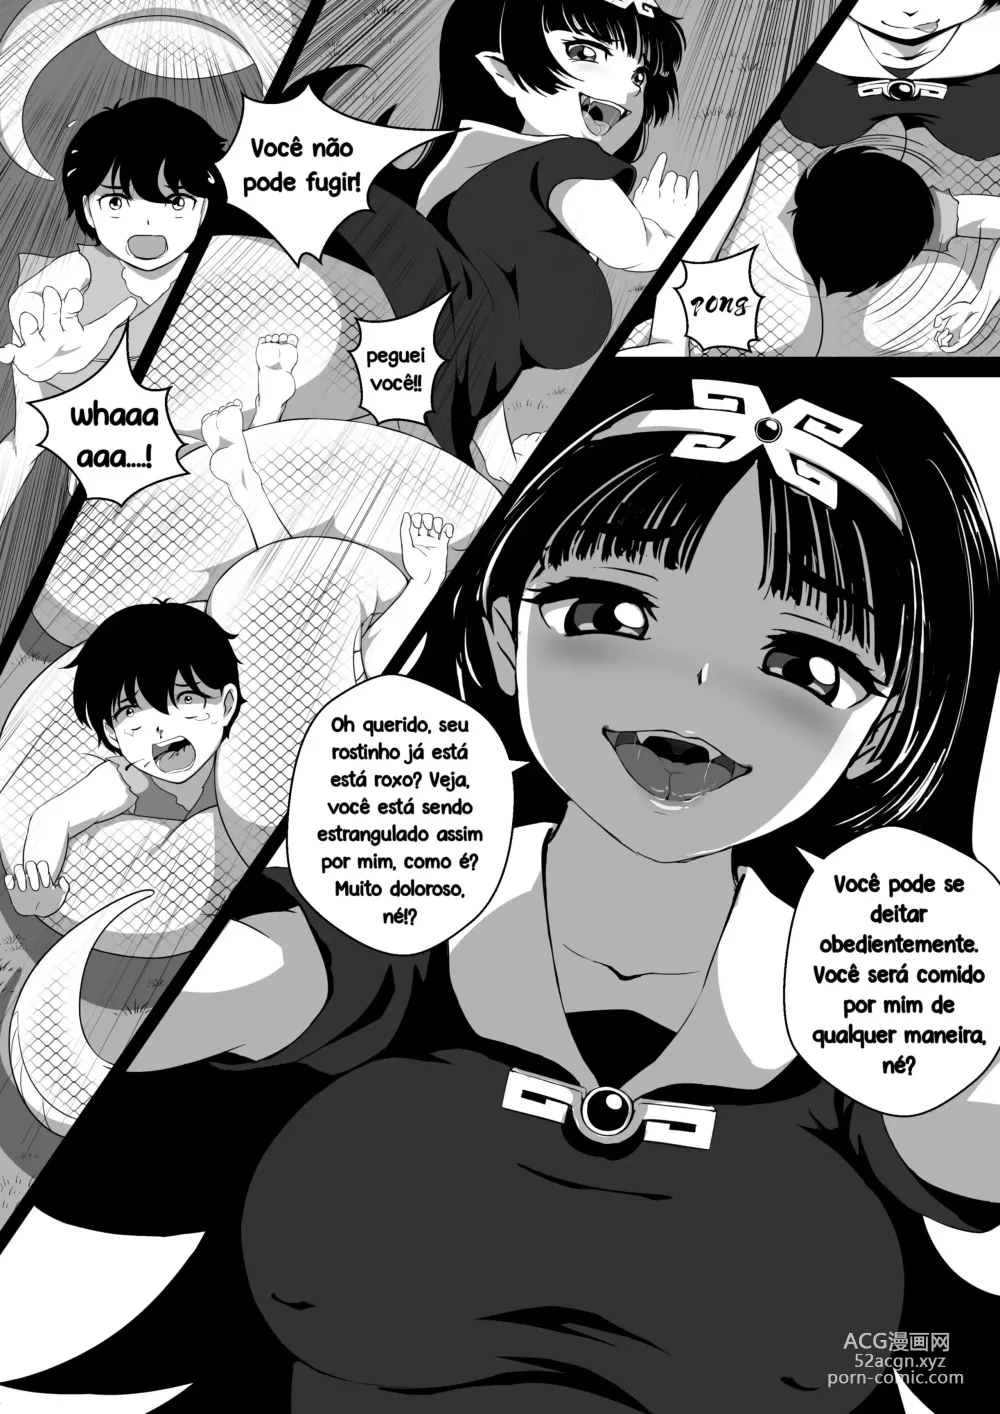 Page 7 of doujinshi Monstergirl Song - Snake Chapter [CG17] PT-BR